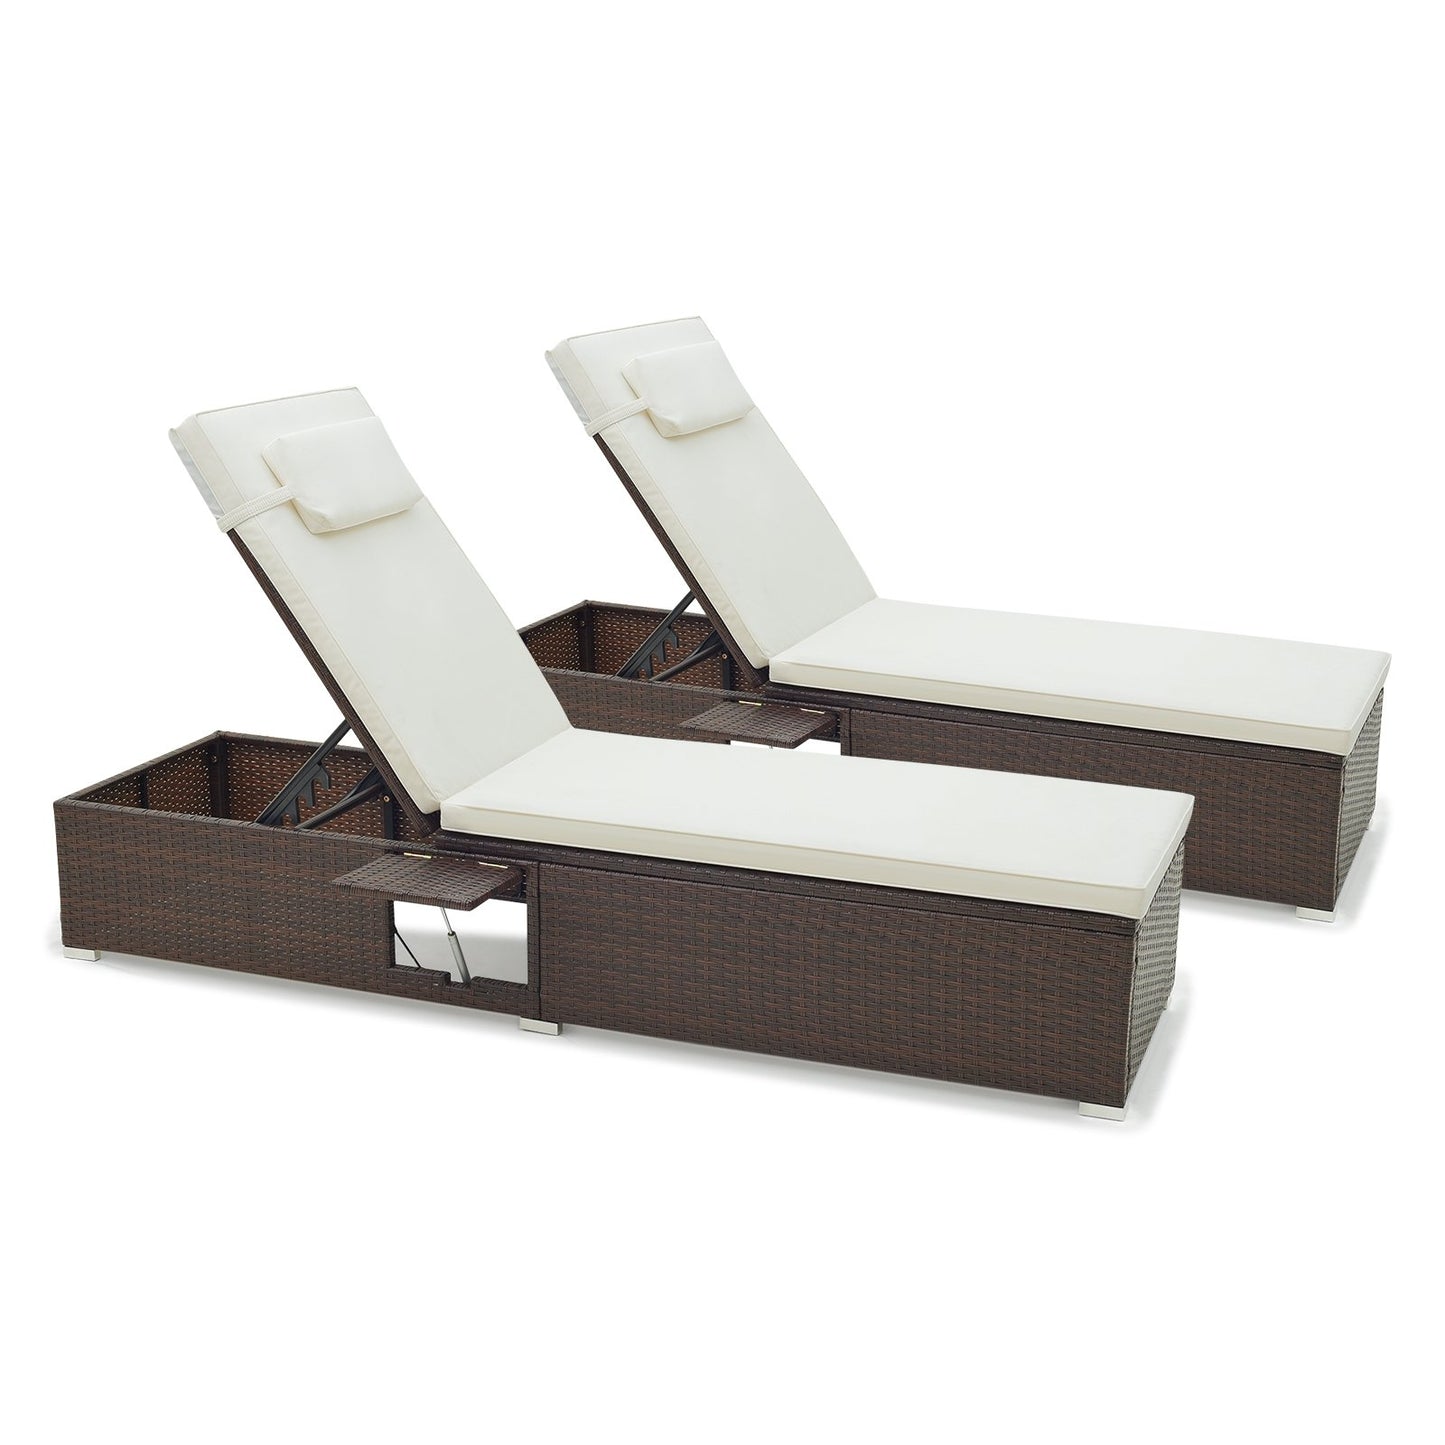 Outdoor PE RattanChaise Lounge with 6-level Backrest, Off White